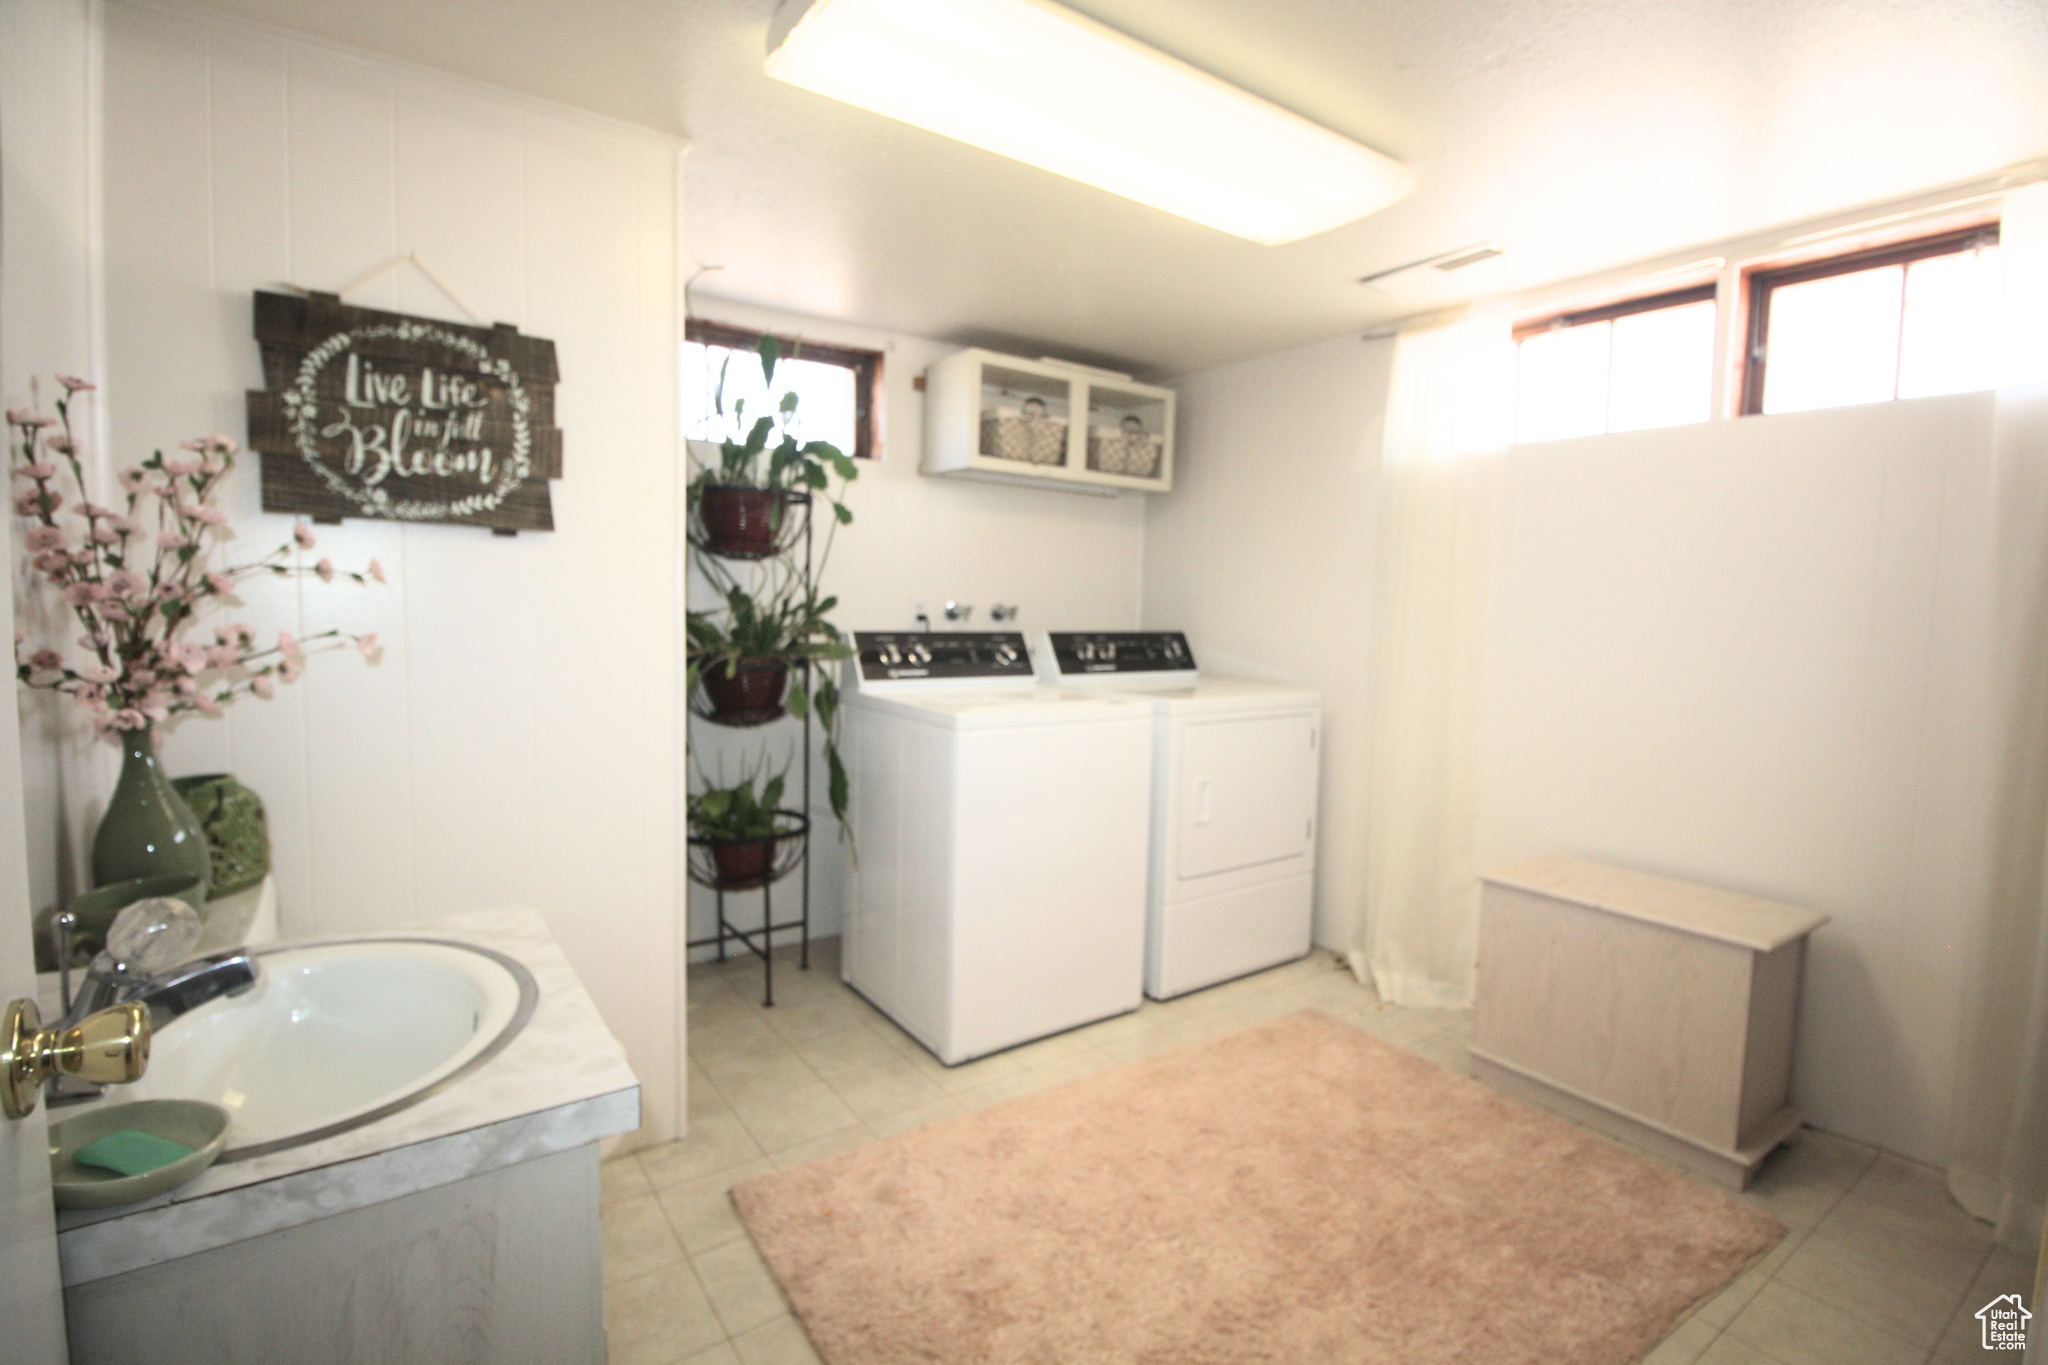 Clothes washing area featuring sink, light tile floors, washer and dryer, and plenty of natural light